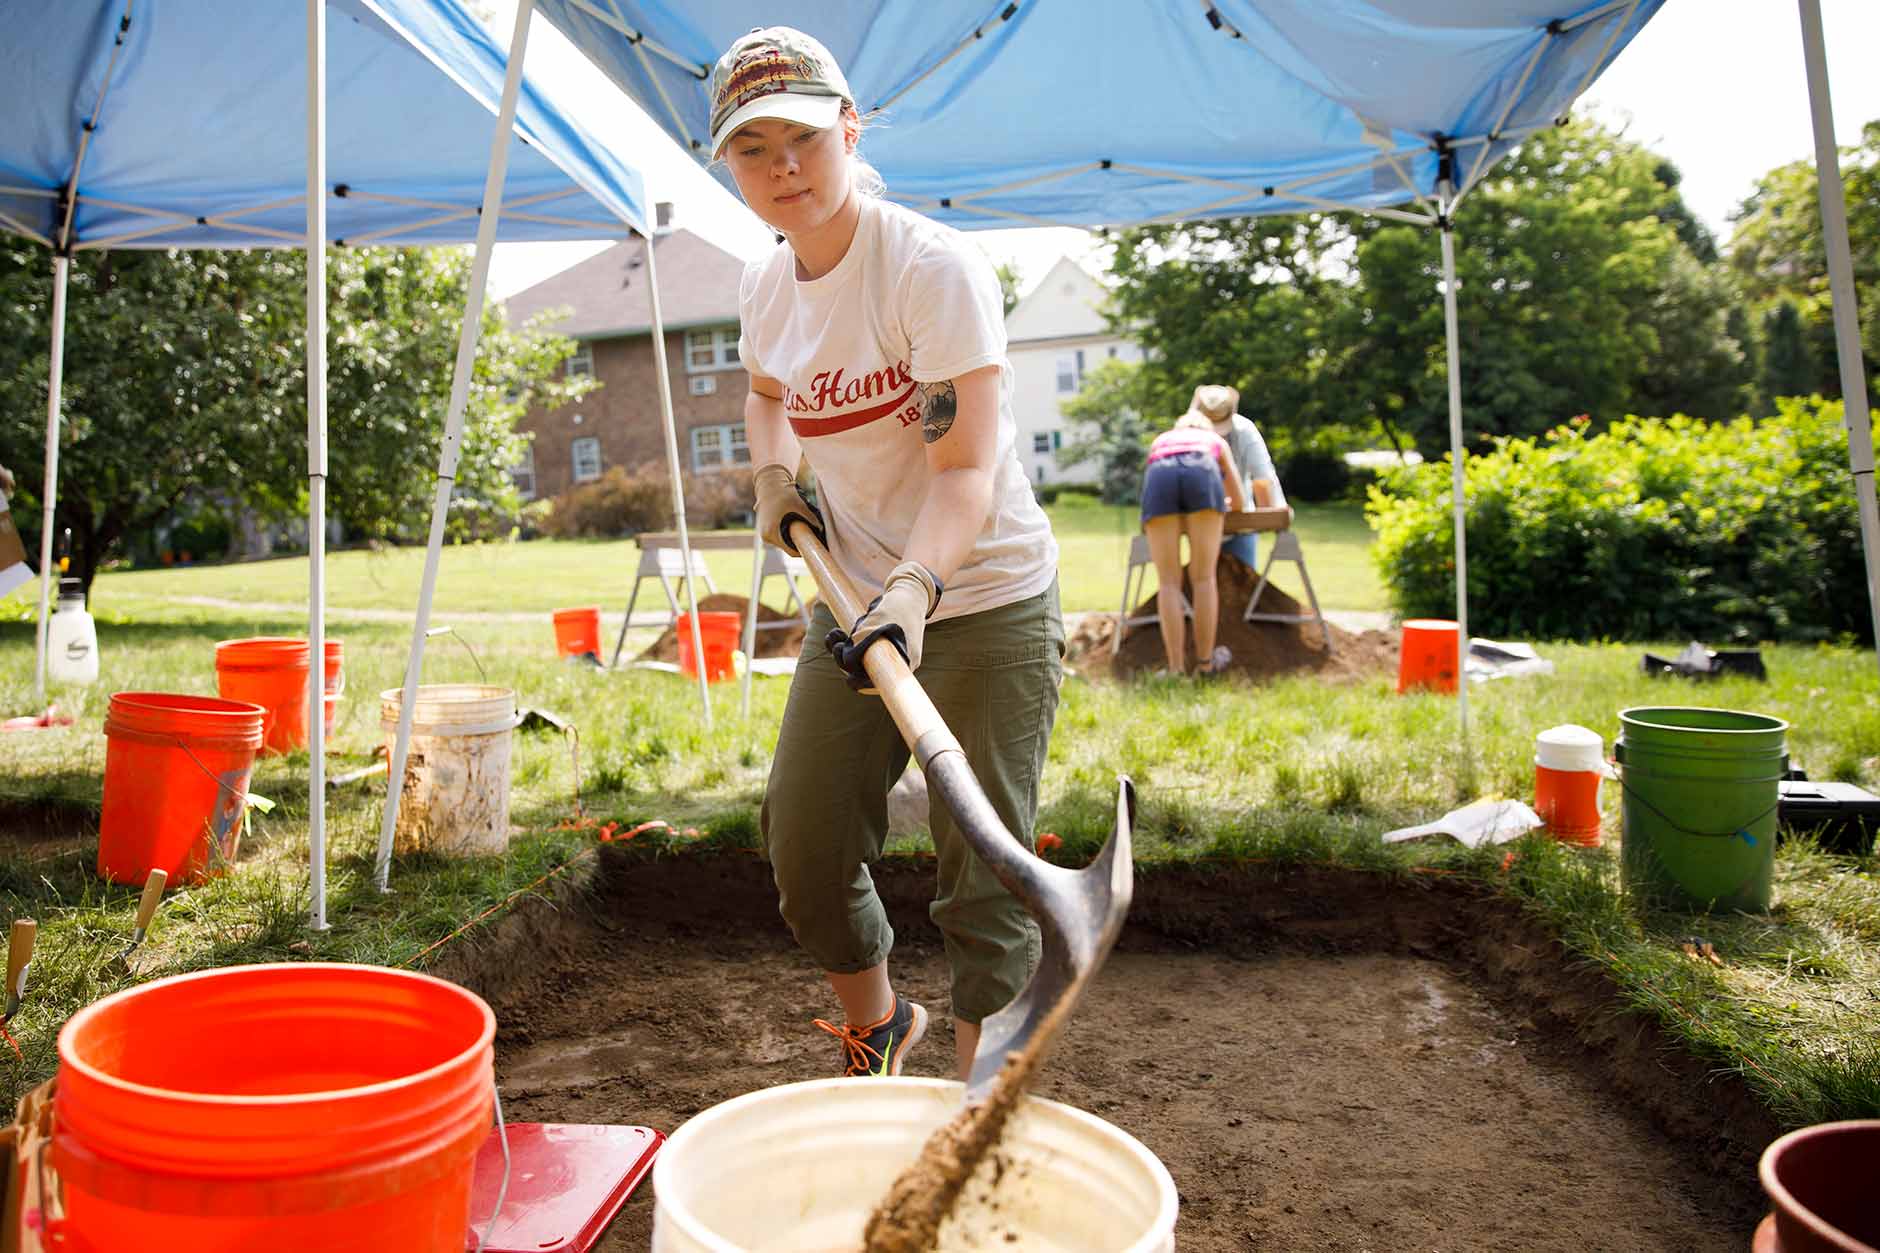 Indiana University sophomore Maclaren Guthrie digs during an archaeological project at Wylie House in Bloomington on Thursday, June 7, 2018. (James Brosher/IU Communications)